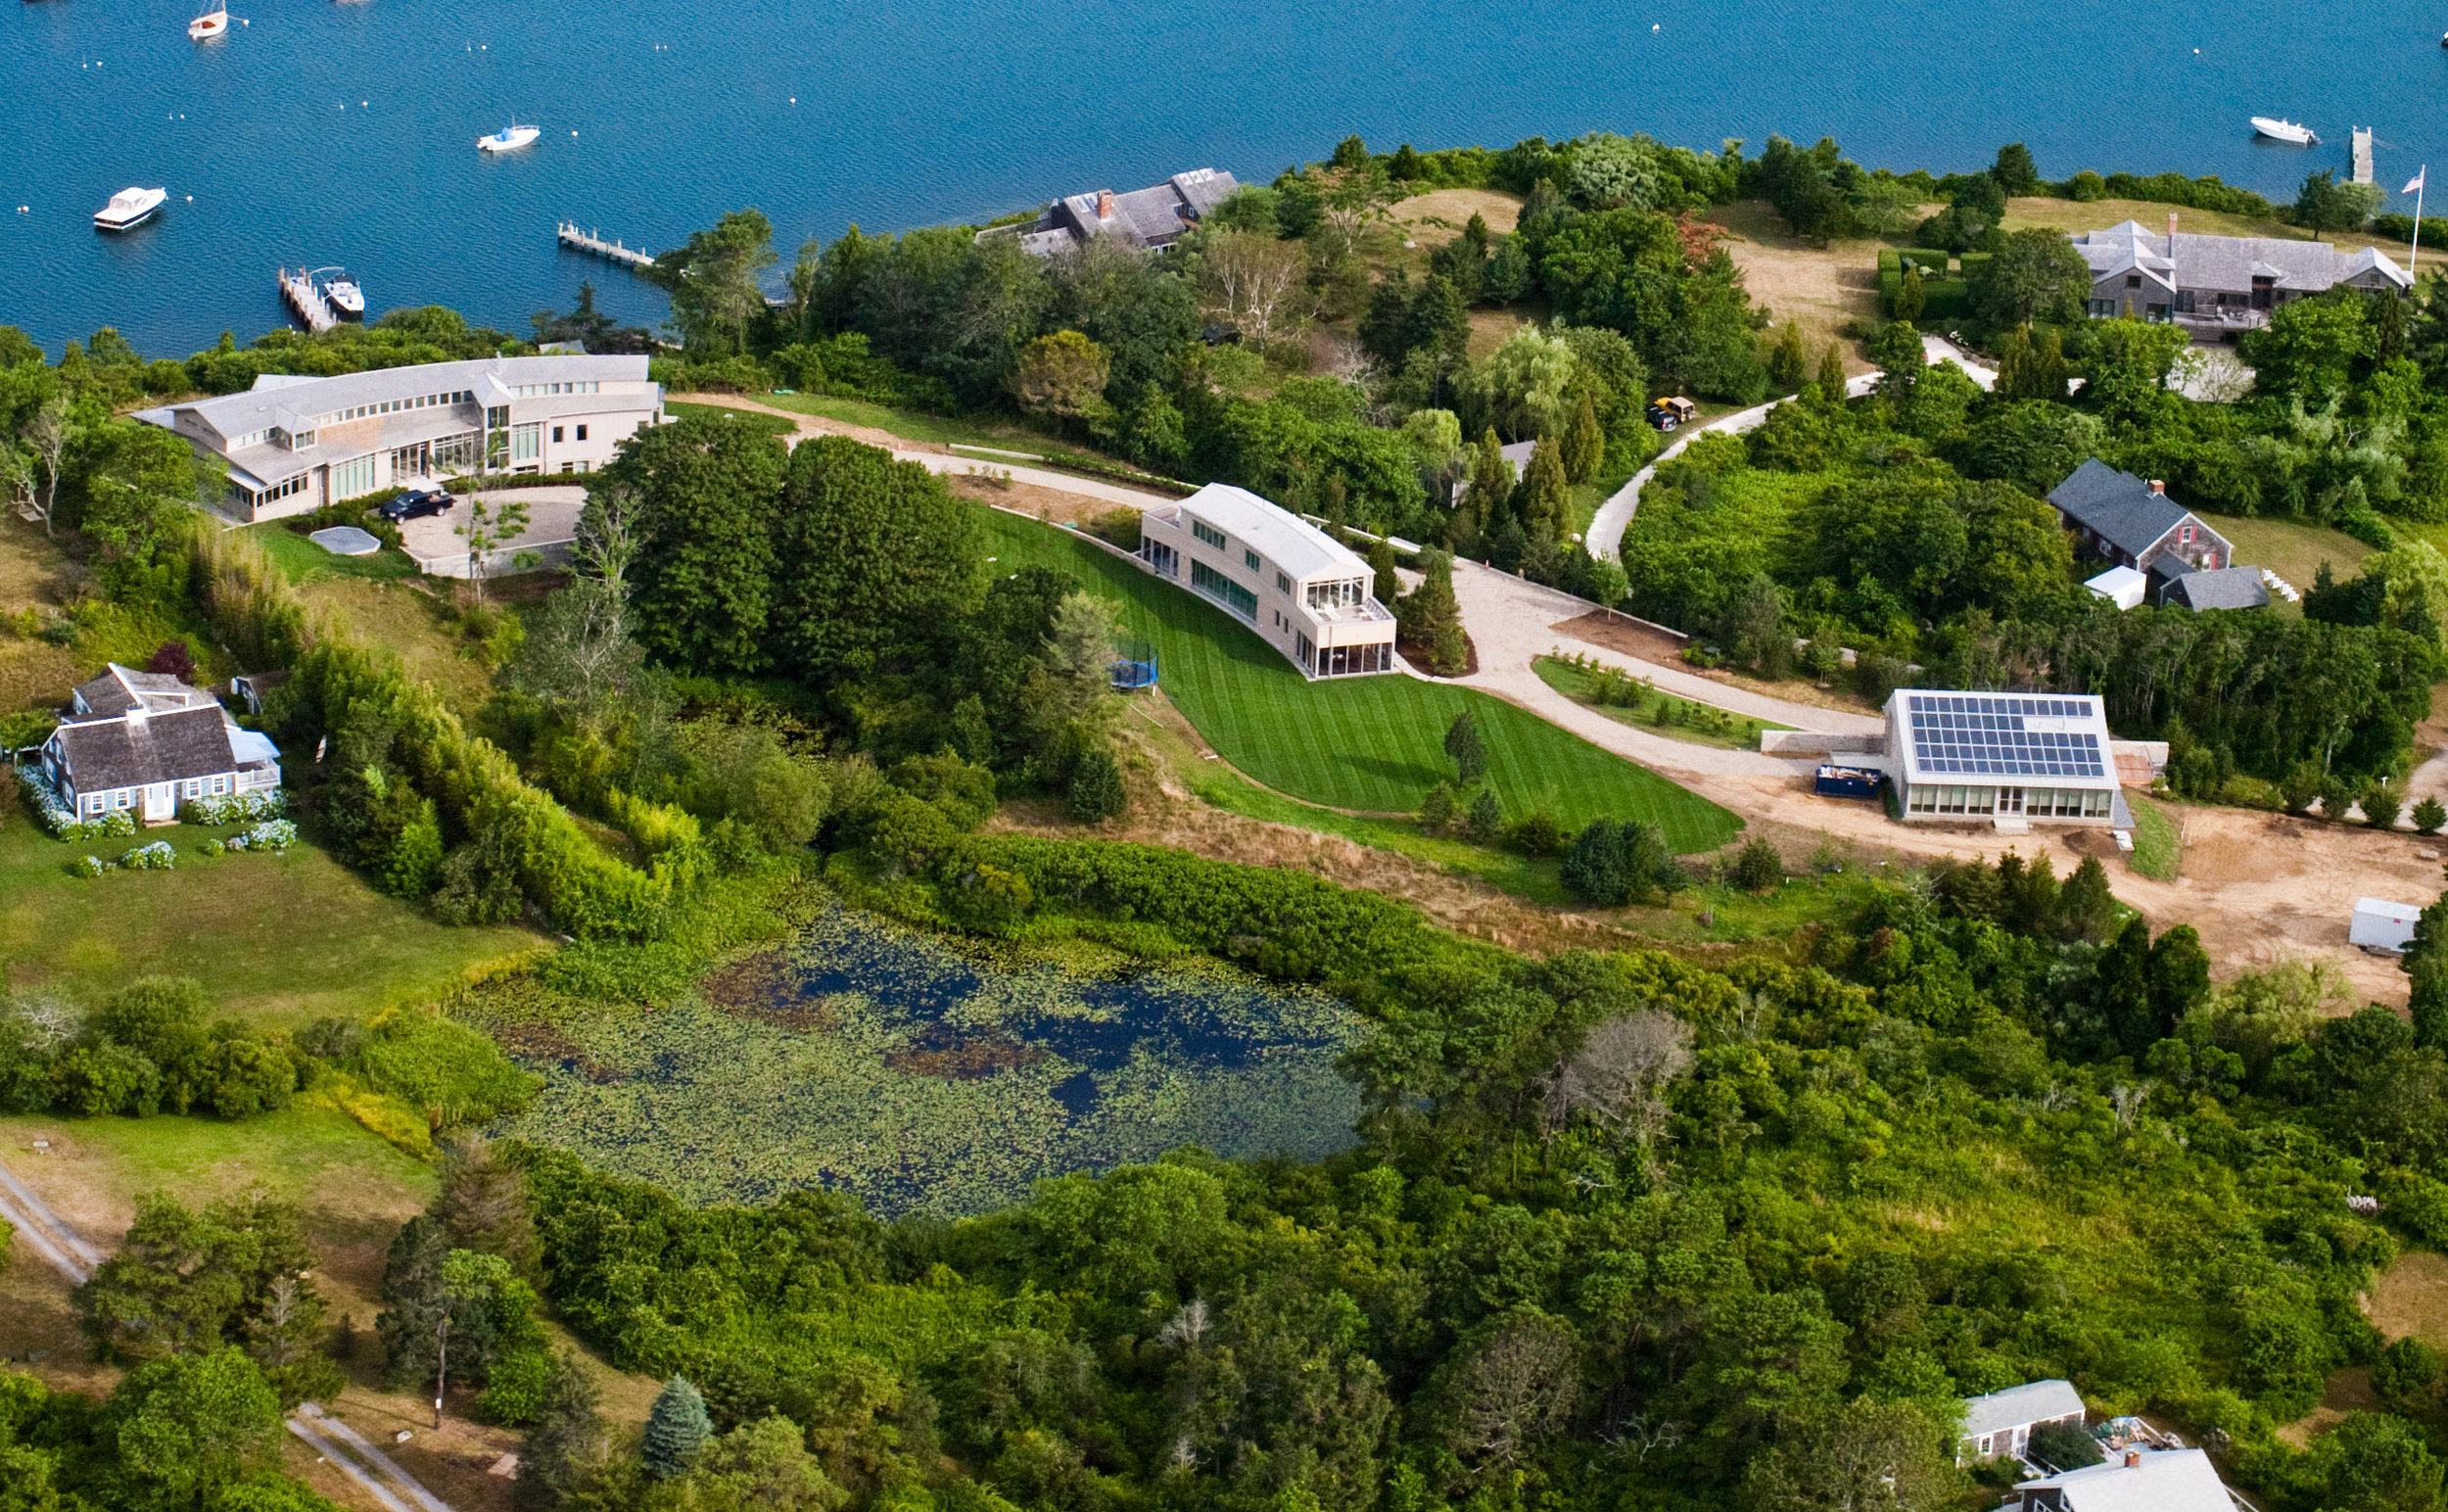 A Martha's Vineyard mansion with accessory buildings under construction